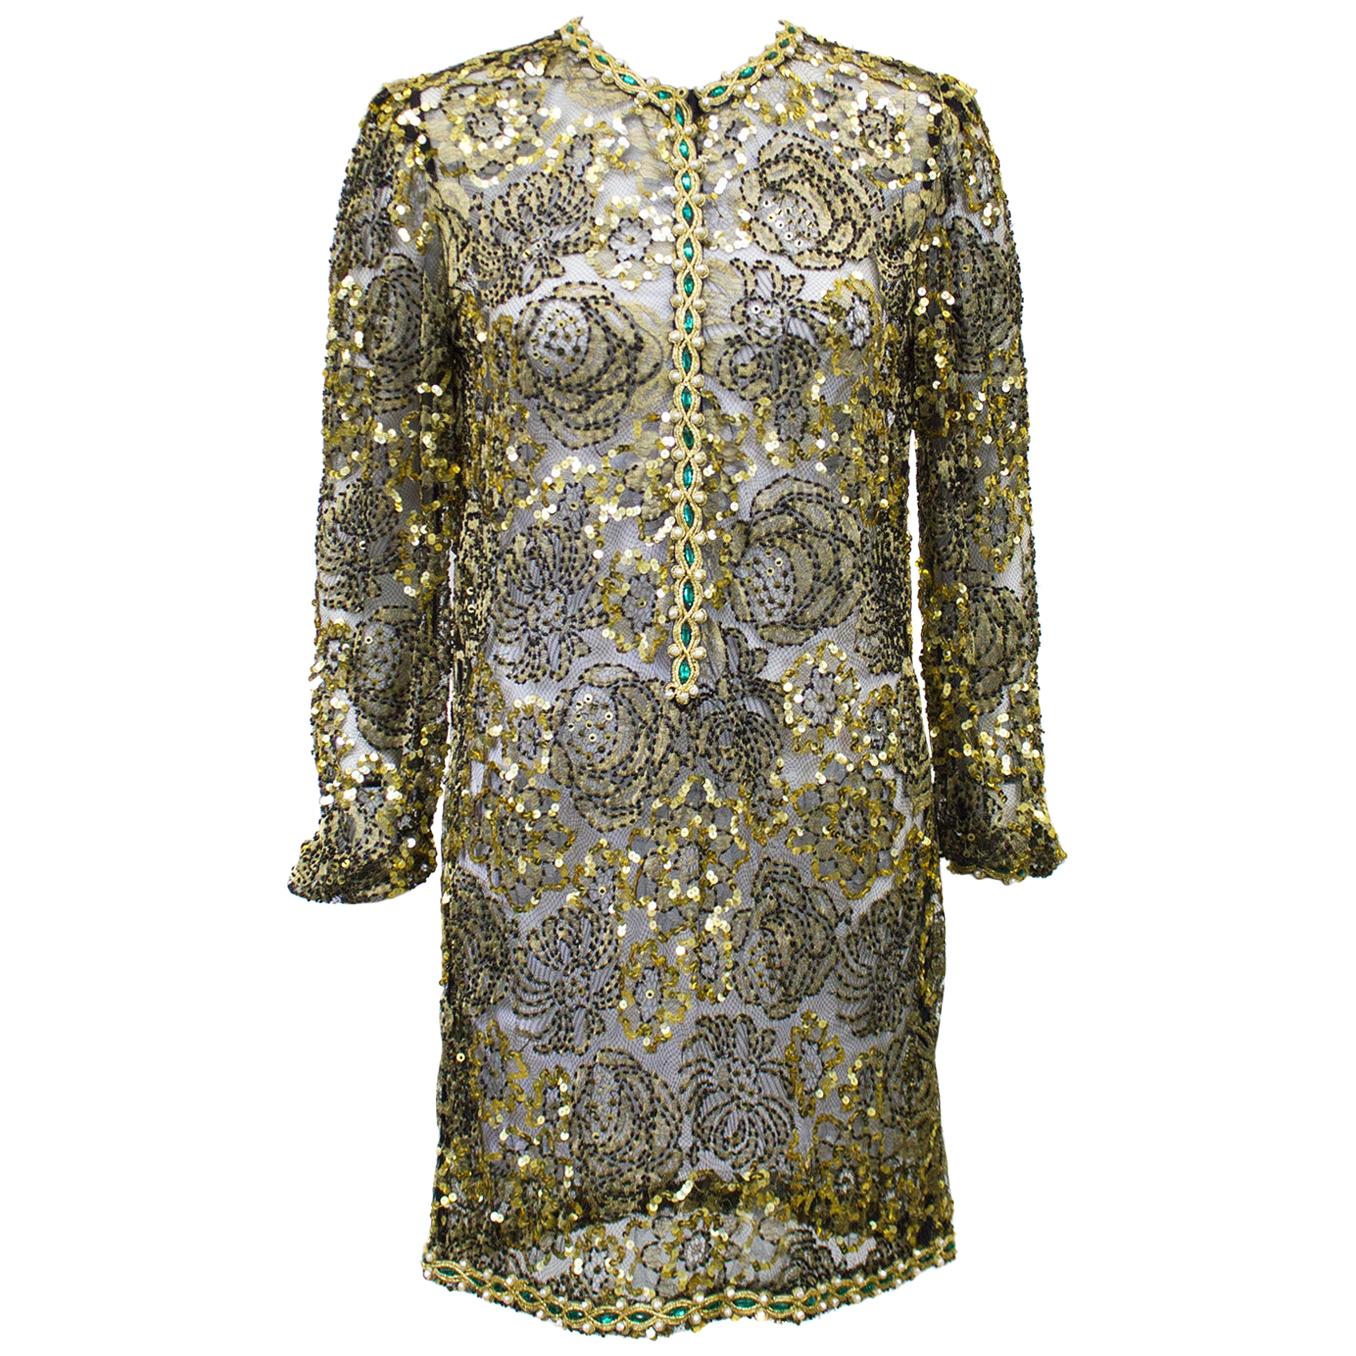 1970s Adolfo Gold Lace Beaded Evening Tunic